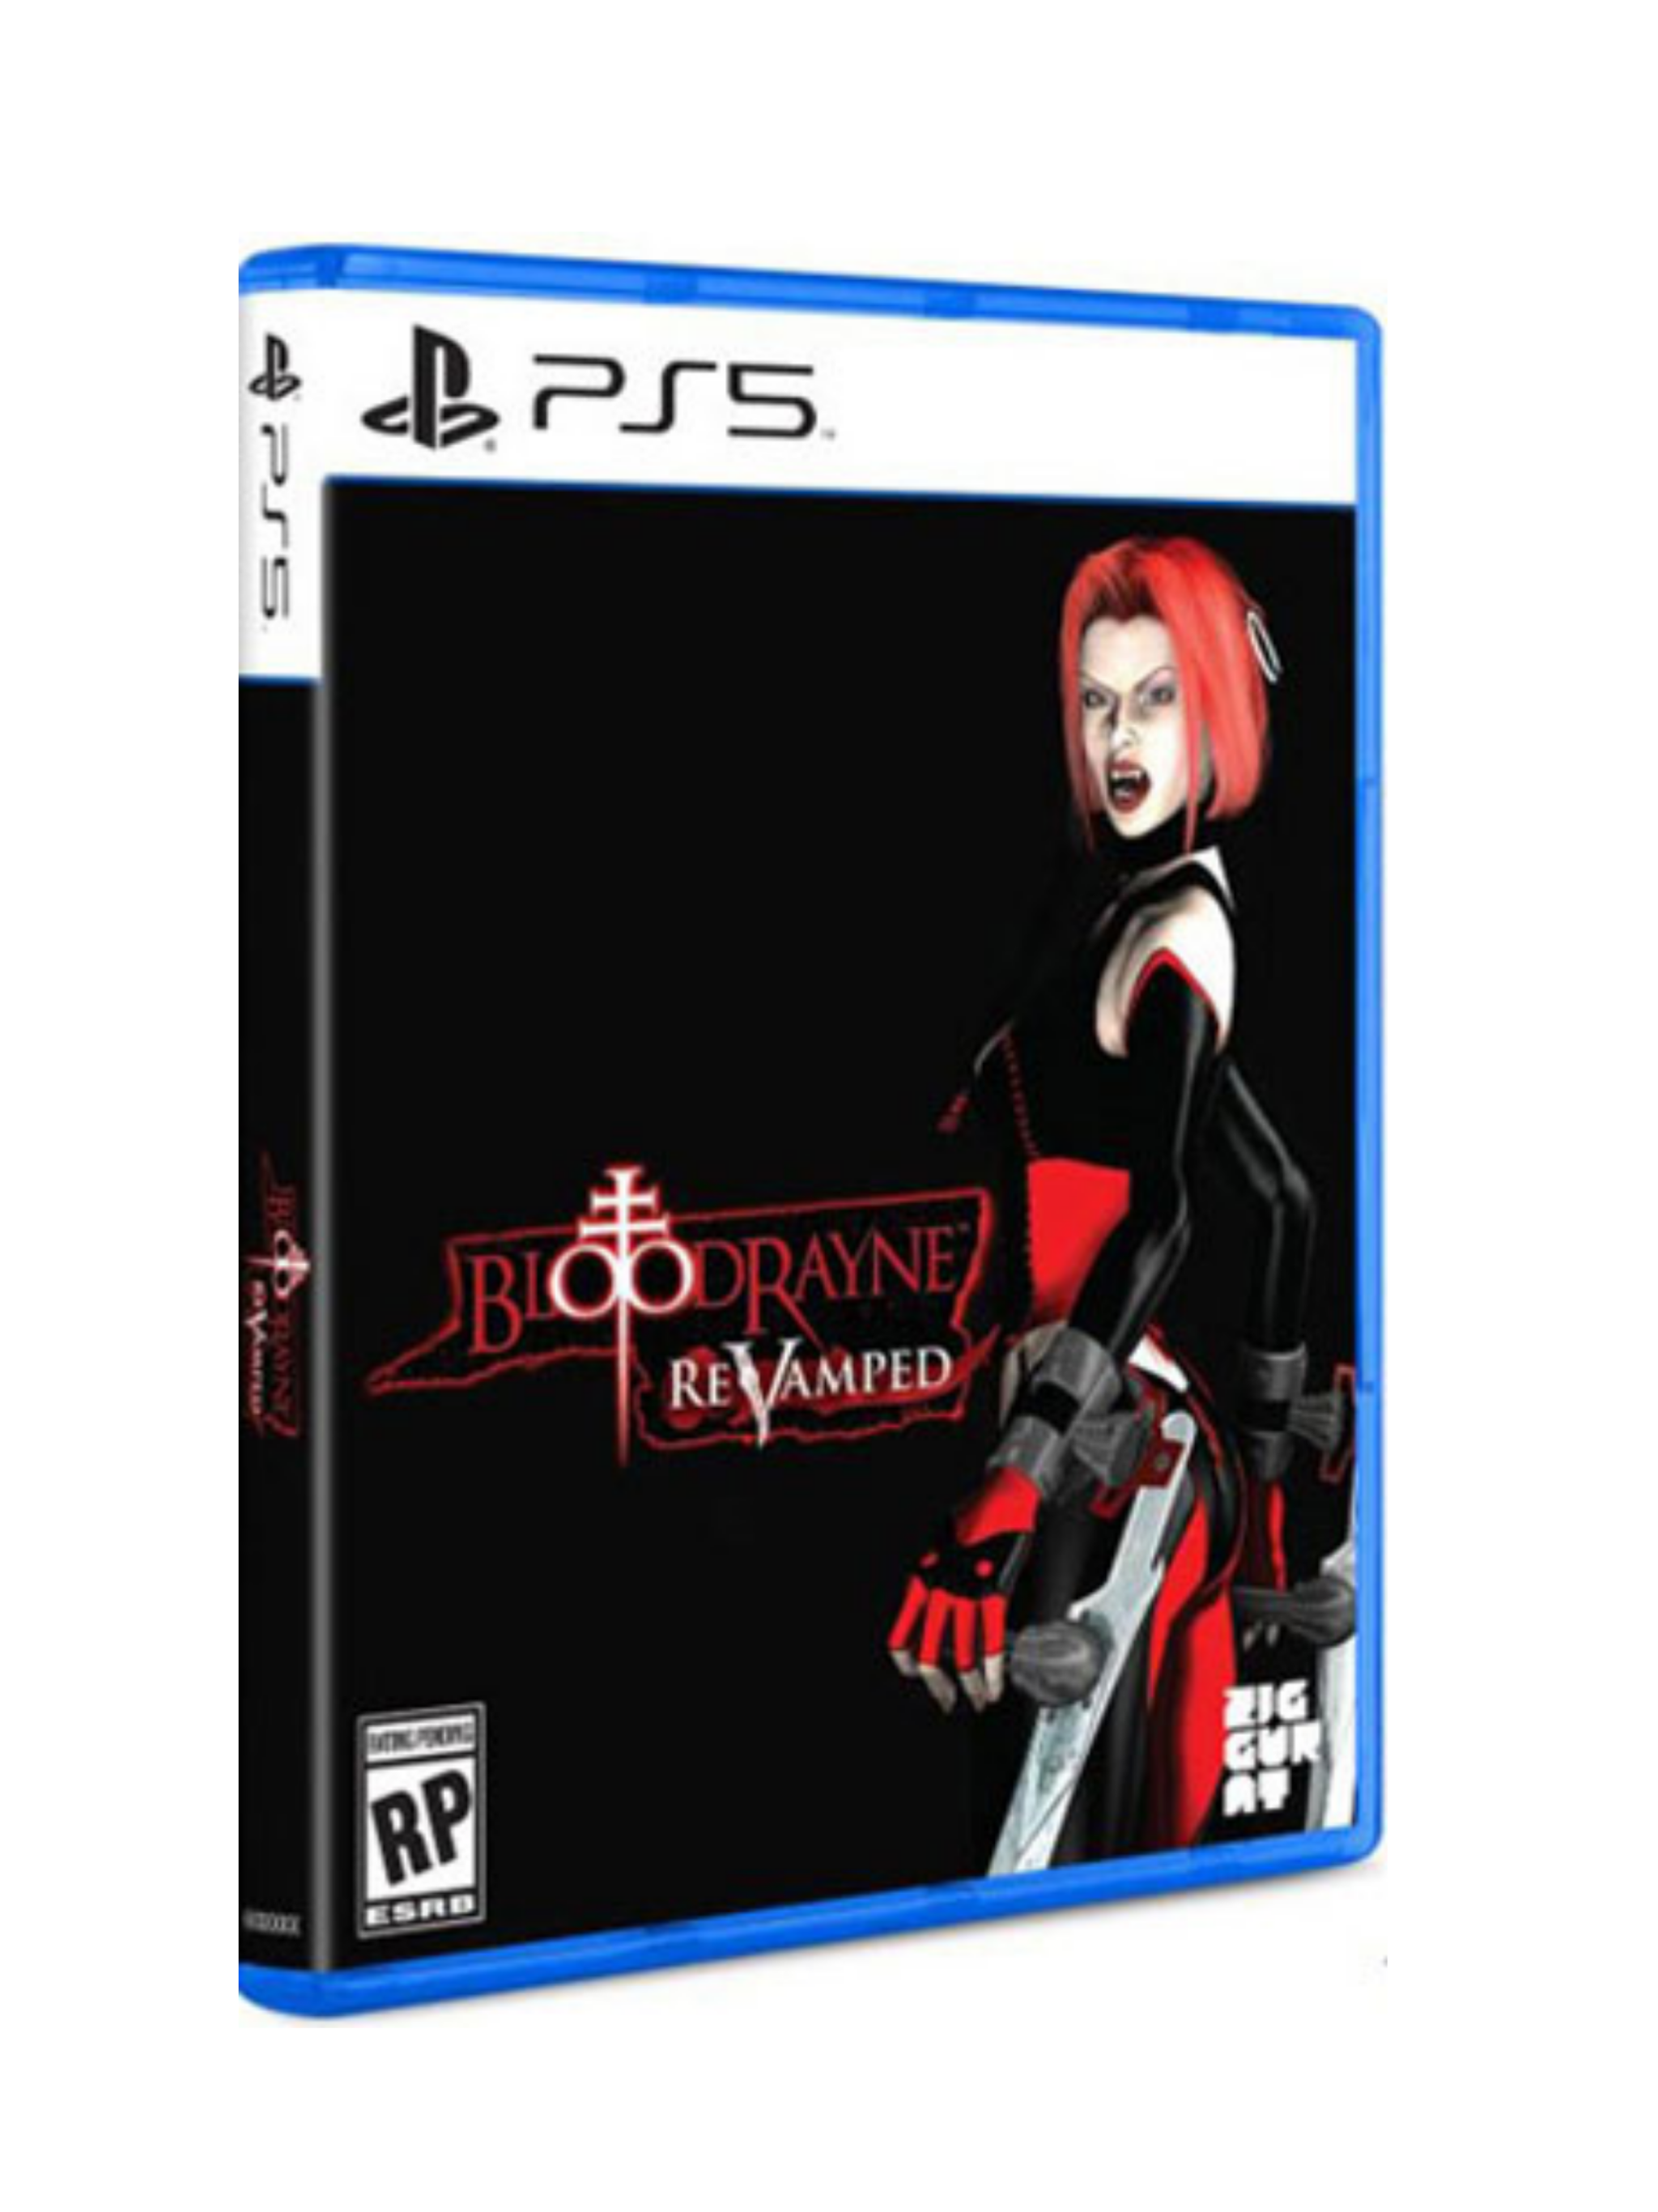 Bloodrayne Revamped US Limited Run